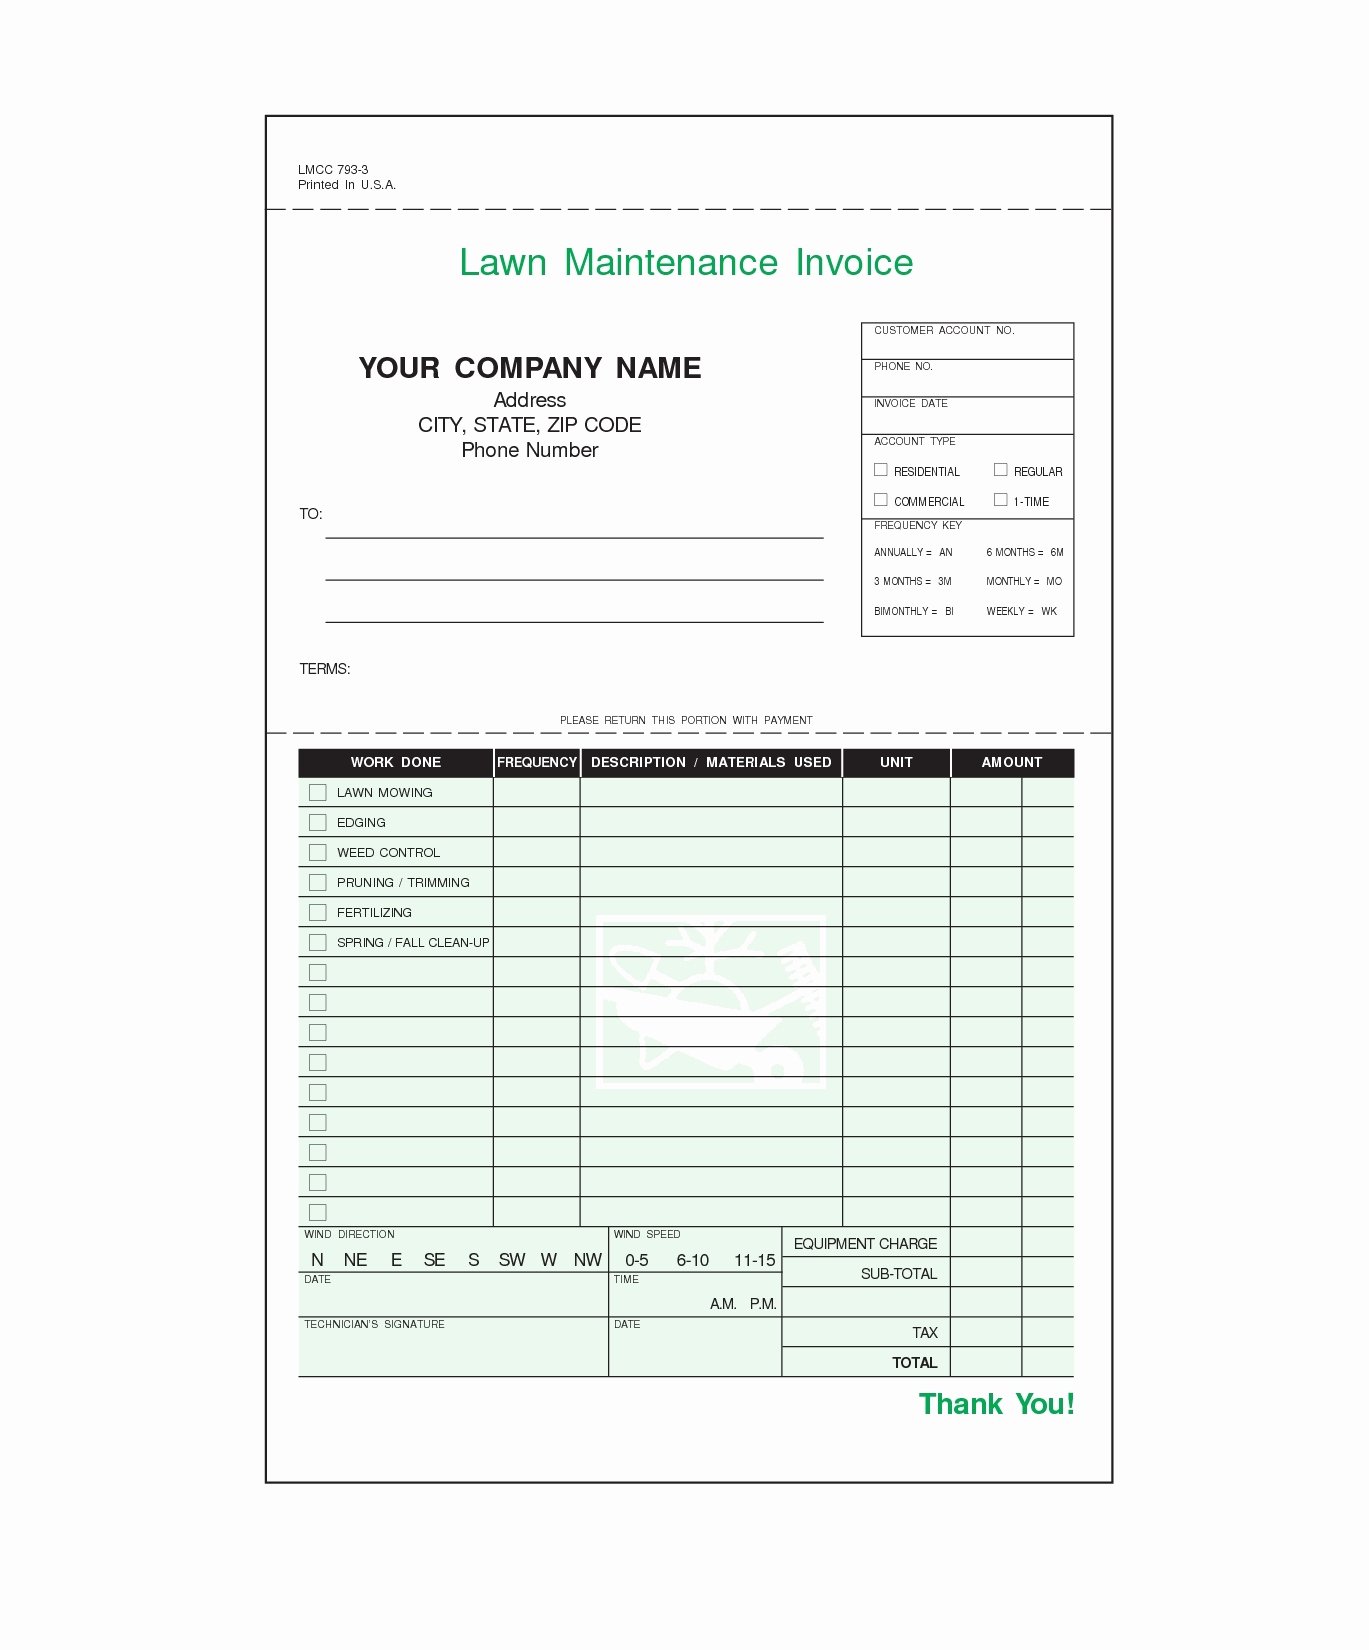 Landscaping Invoice Template Free Inspirational Lawn Maintenance Invoice Invoice Template Ideas